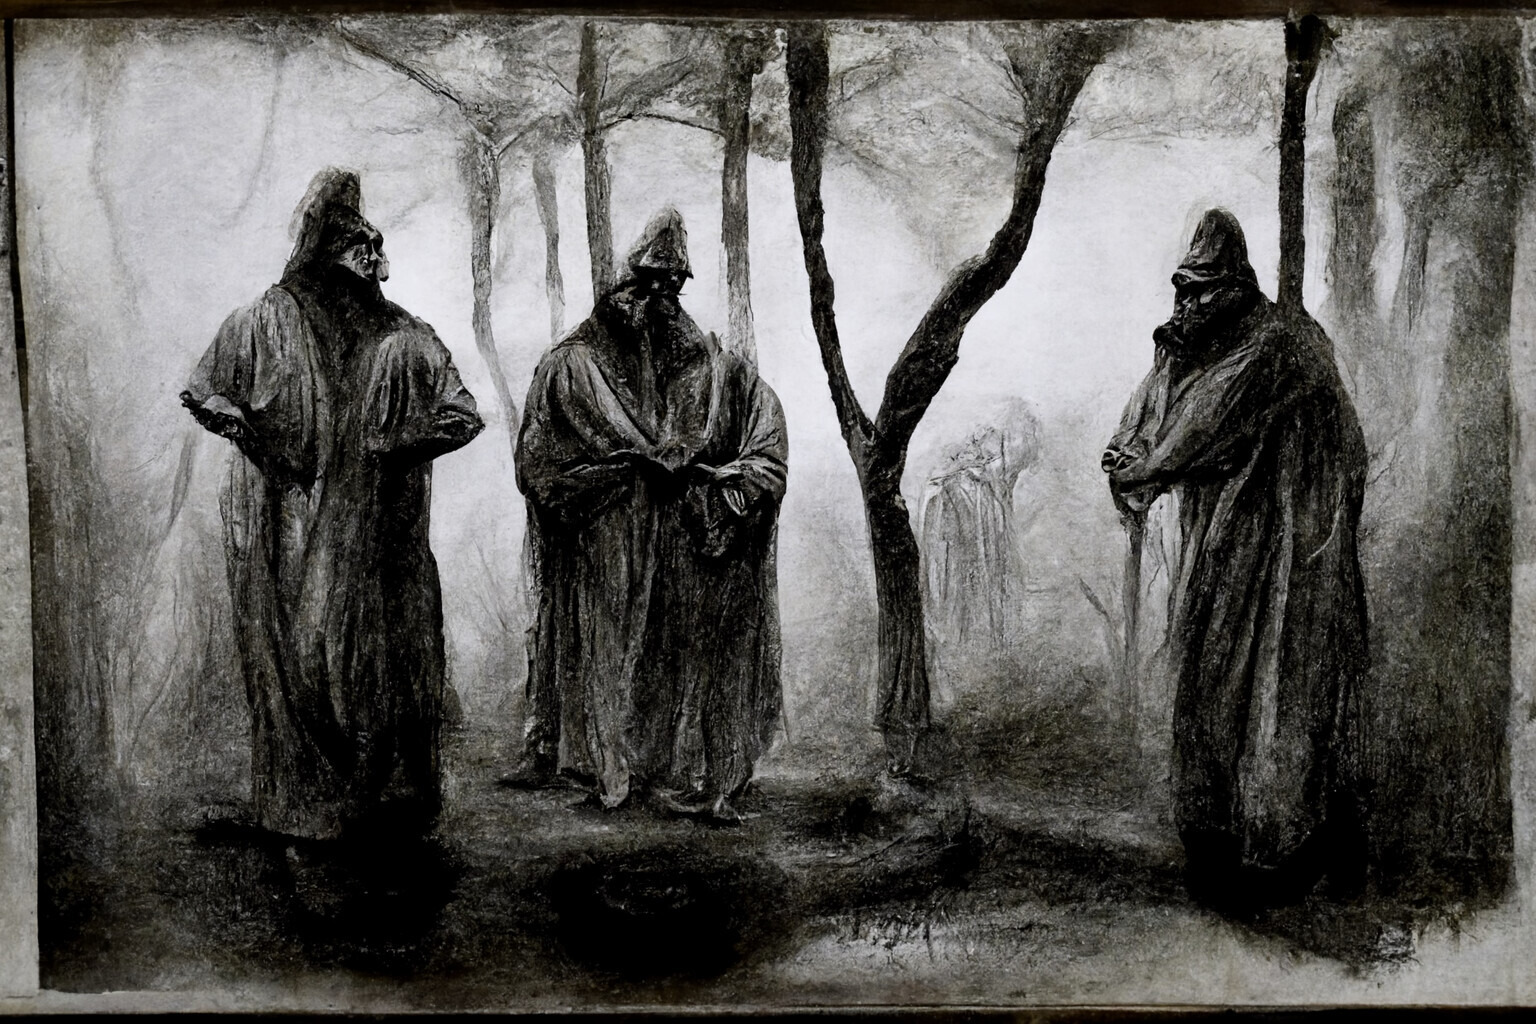 The Elders of Cer Mare
c. 1881
Charcoal on paper